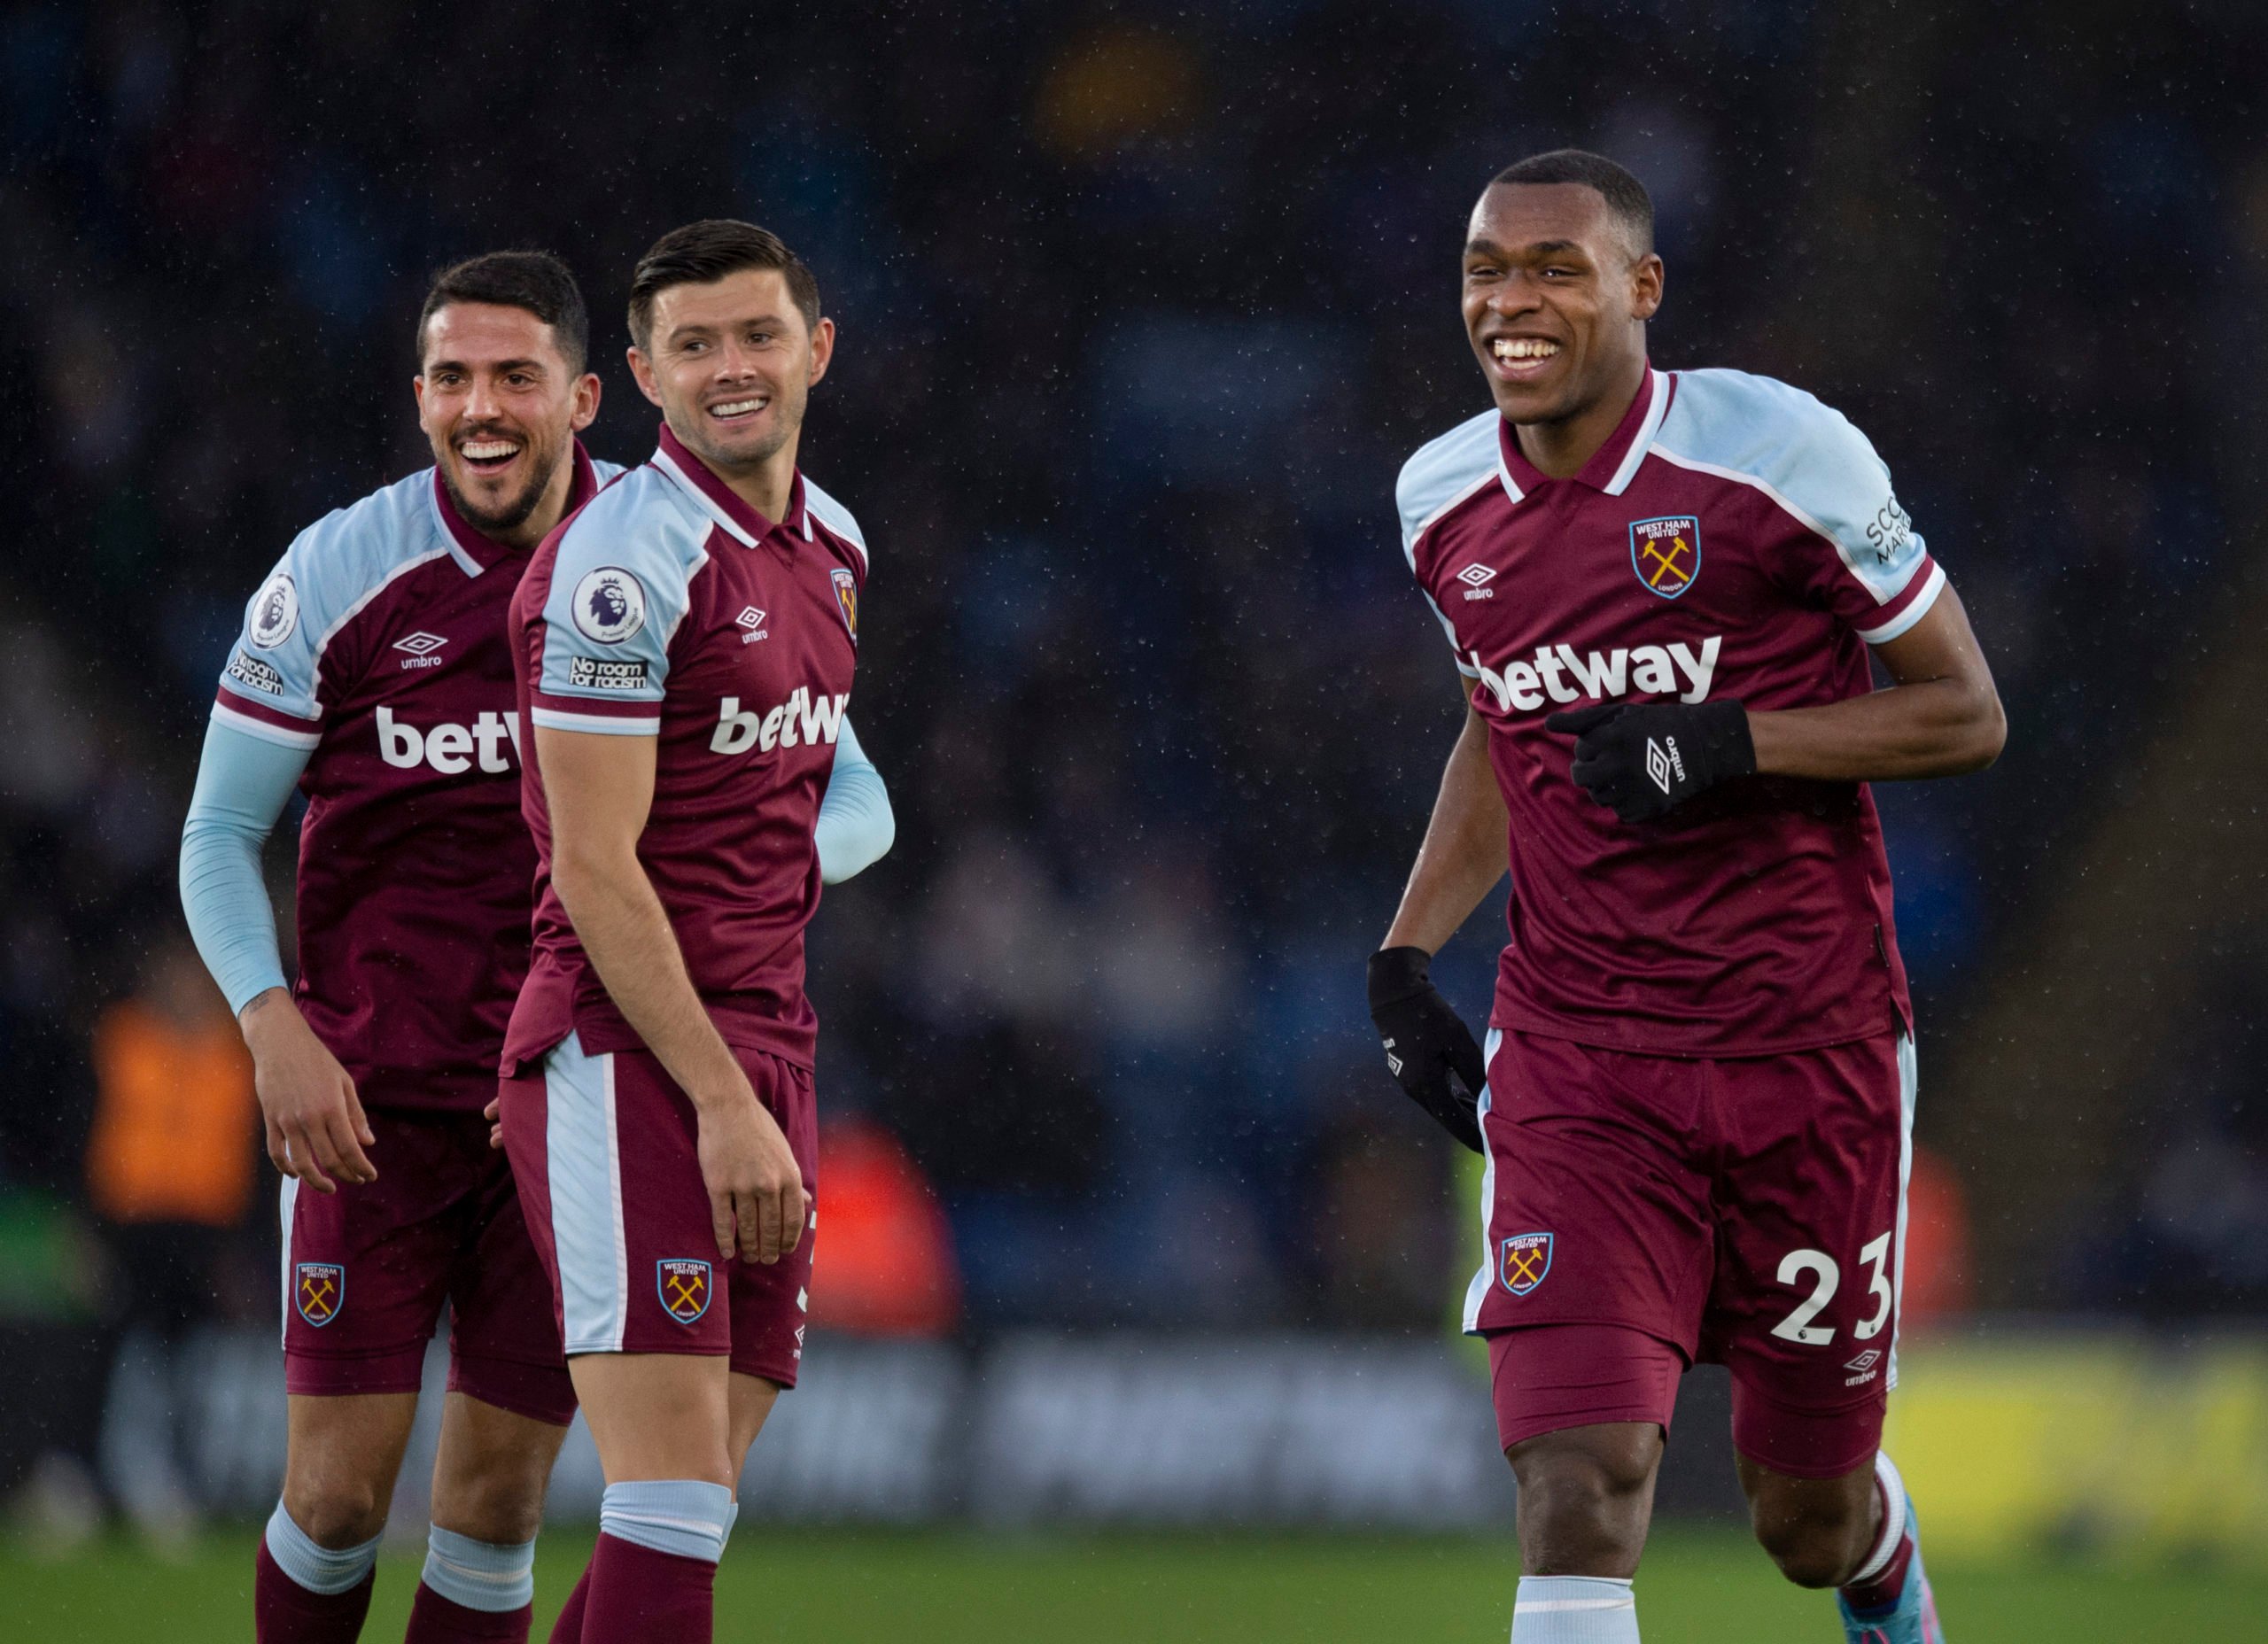 If there's one thing West Ham fans love Issa comeback story and Diop's could top the lot